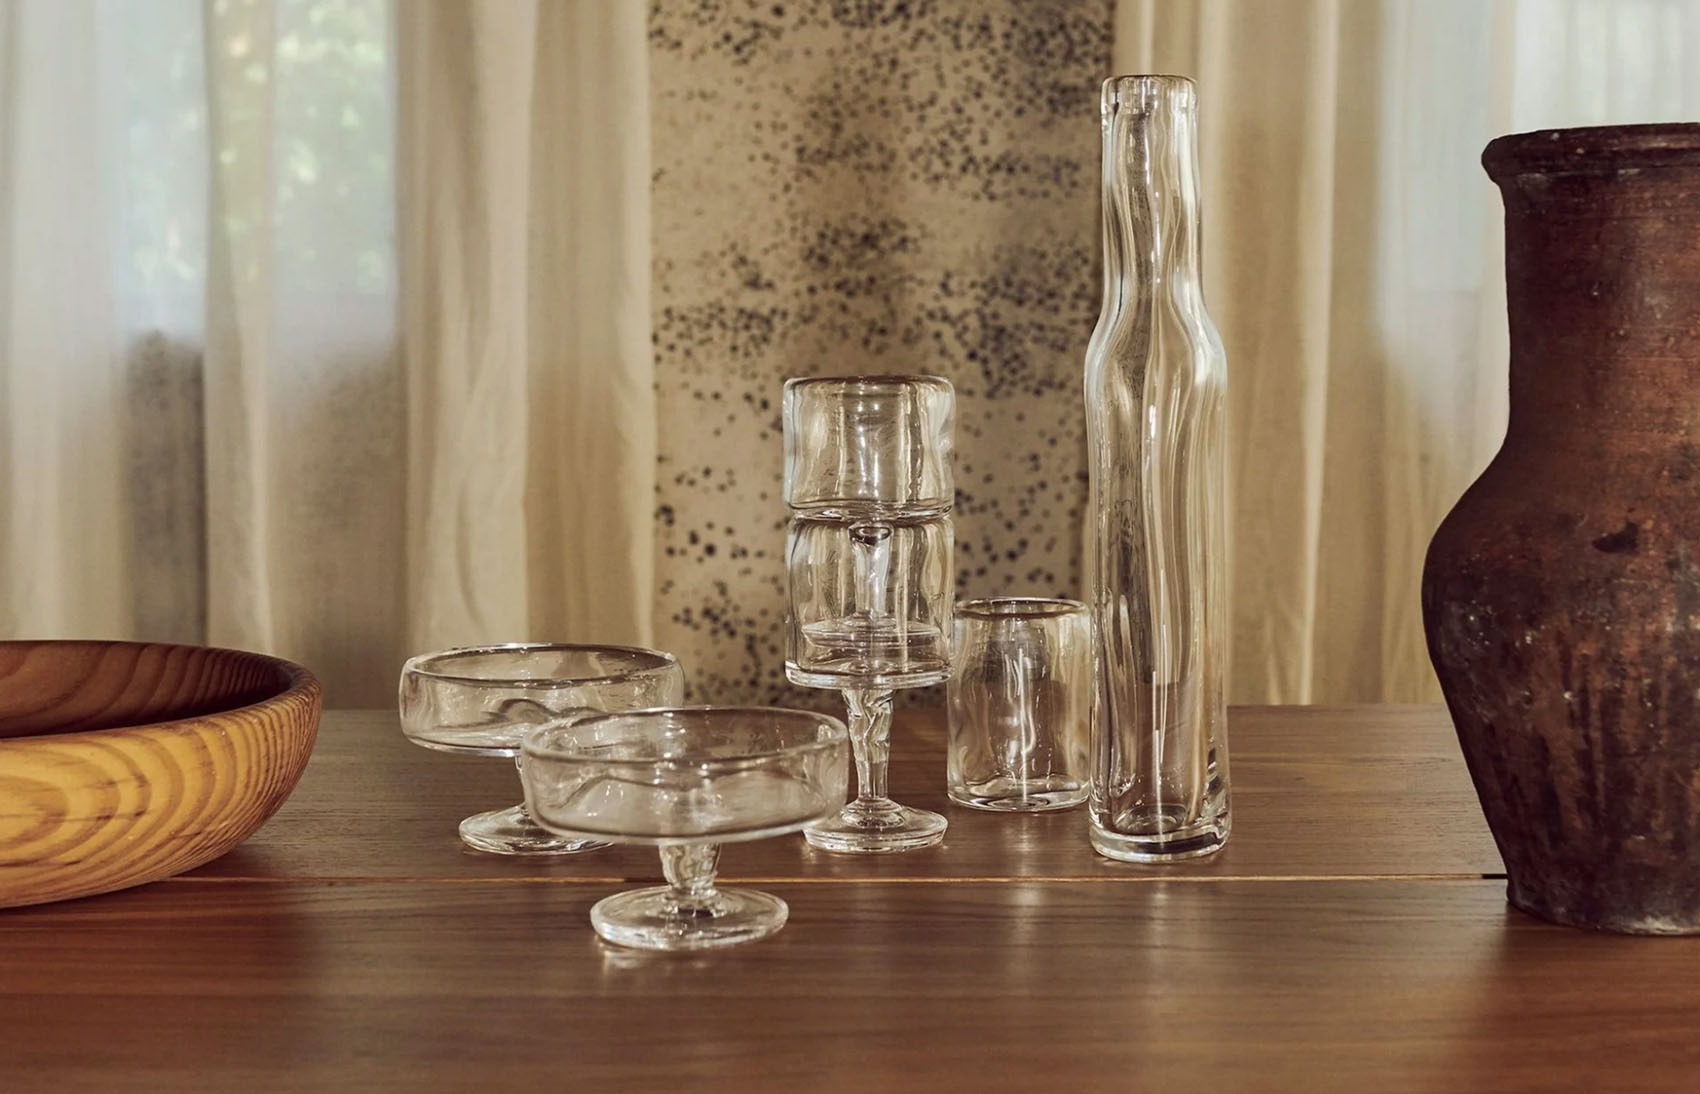 Frama 0405 Glass Collection, featuring Stem Glass Wide